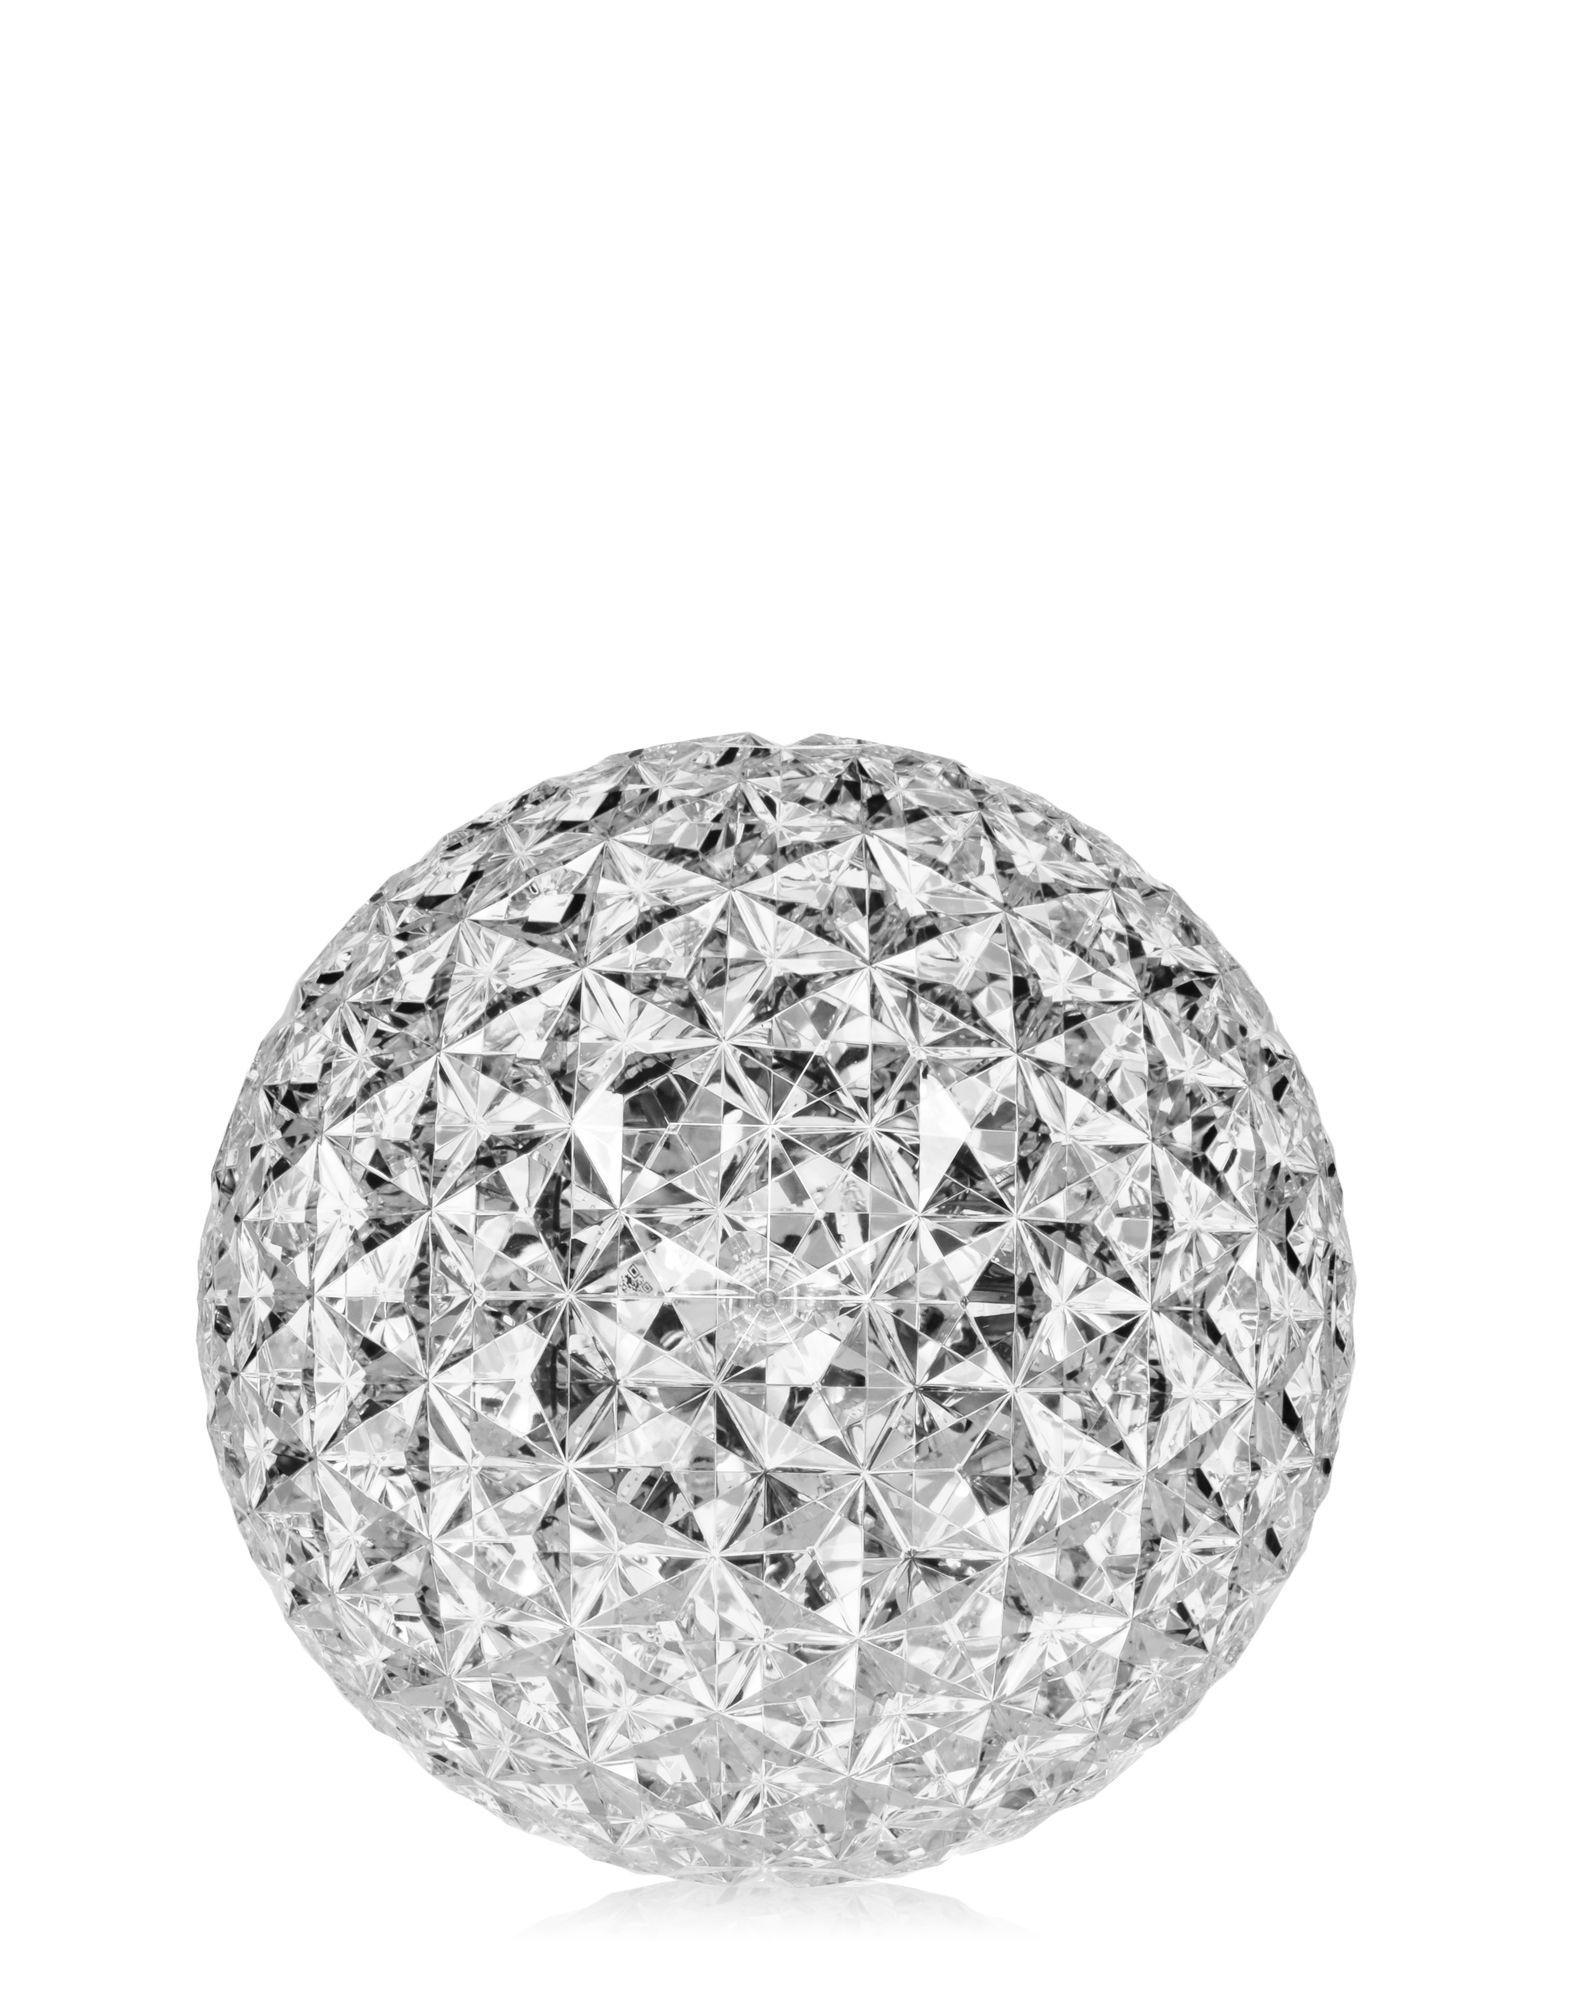 Planet lamp in crystal. Its special feature that is the shape of its slightly elliptical diffuser. Its transparent surface, which is many-sided both inside and out, creates a rich tapestry of reflections.

Dimensions: Height 11 in, diameter 12.2